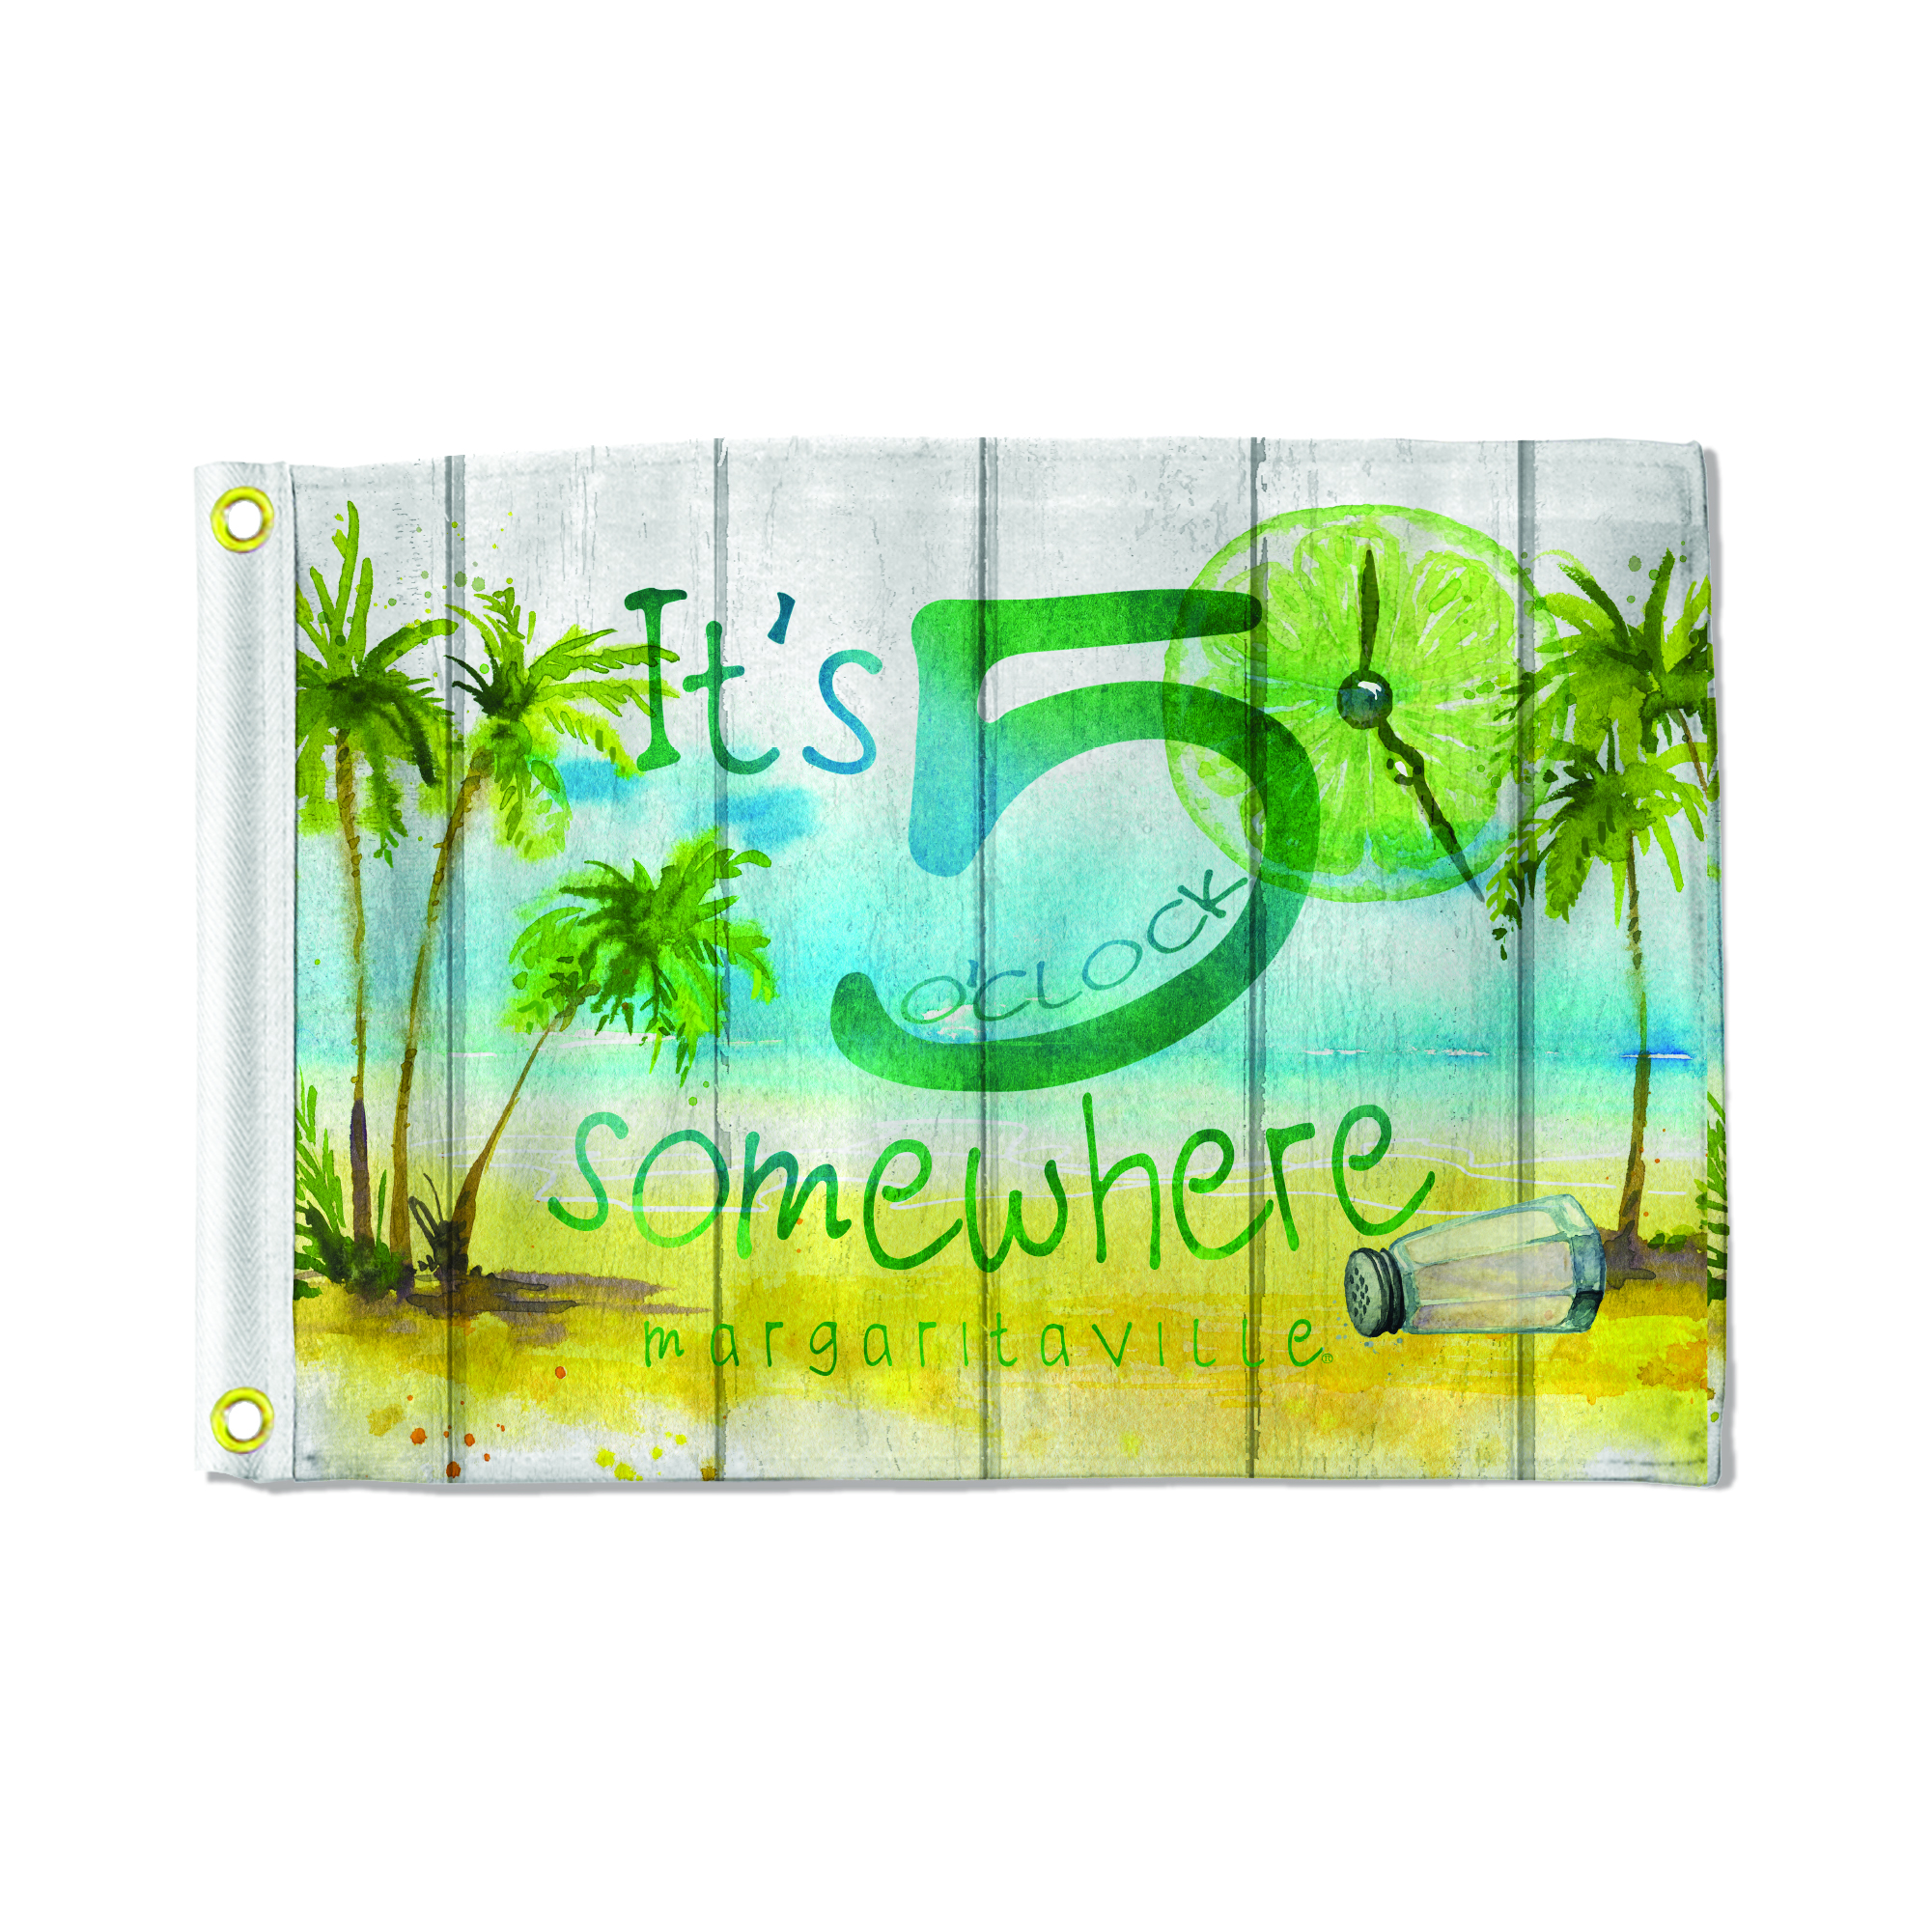 Rico Margaritaville Rico Industries Margaritaville 5 O'Clock 12" x 18" Flag - Double Sided - Great for Boat/Golf Cart/Home